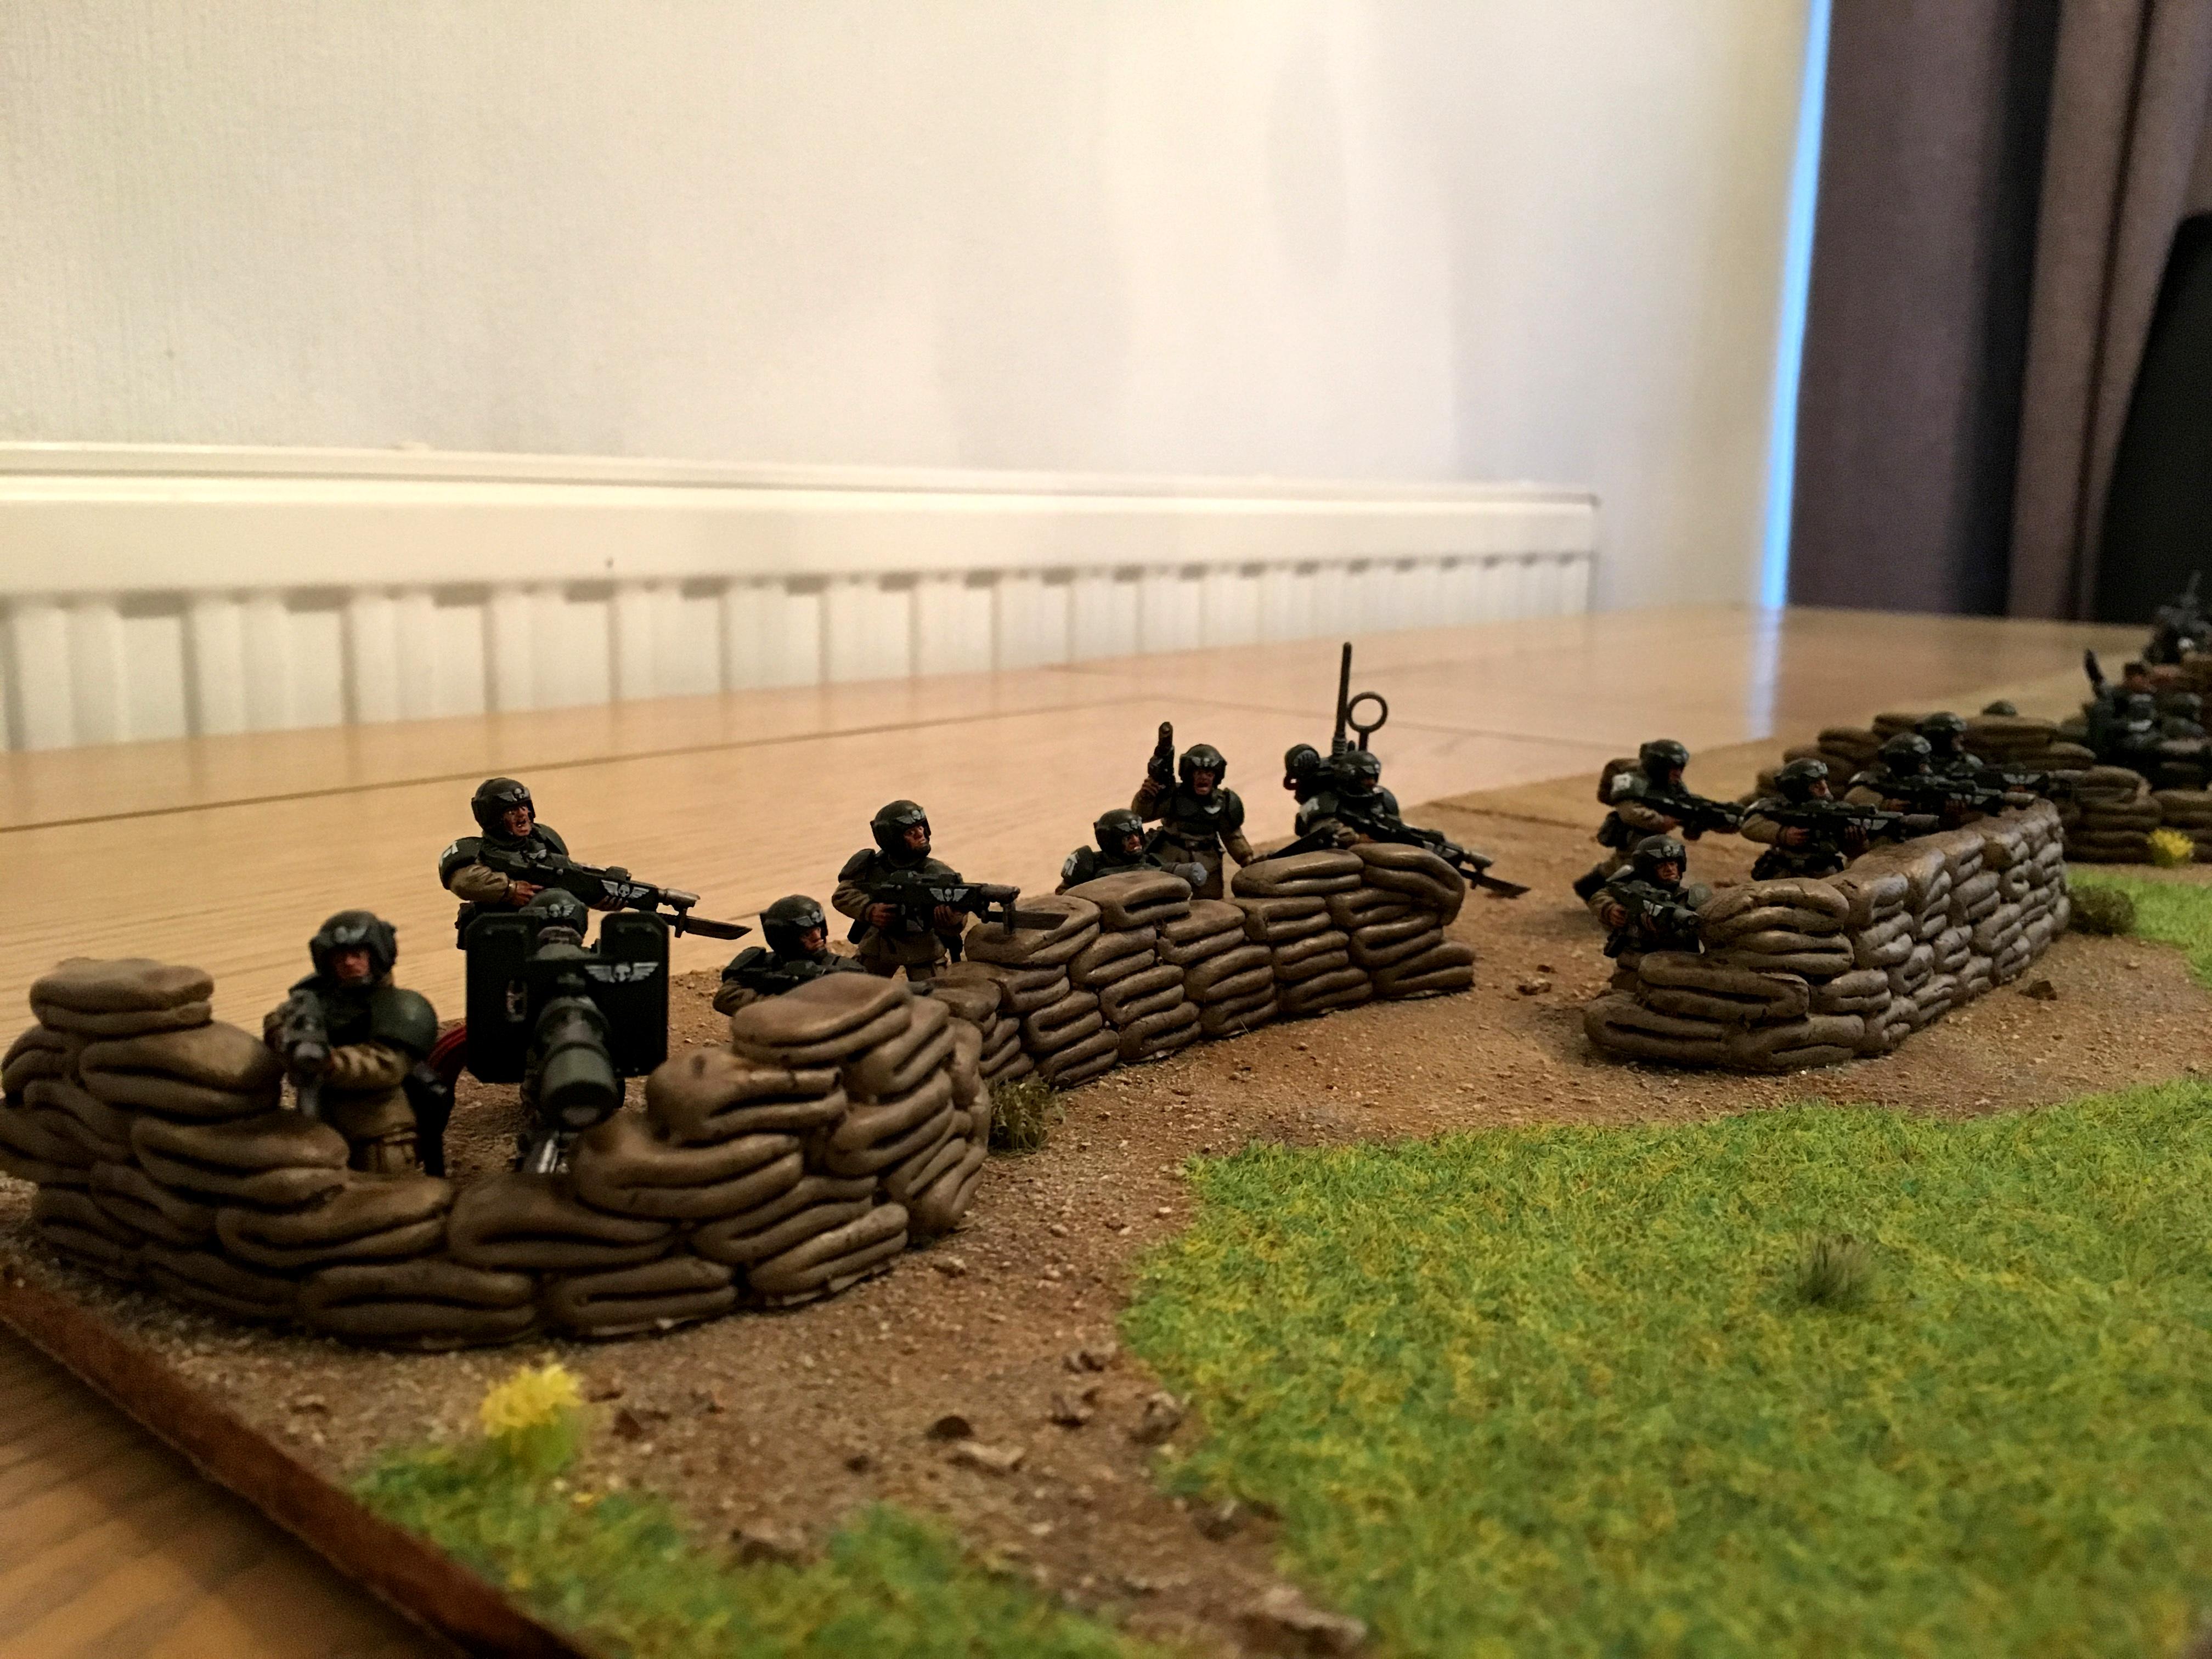 Astra Militarum, Cadians, Diorama, Fortification, Heavy Weapon, Imperial Guard, Infantry, Terrain